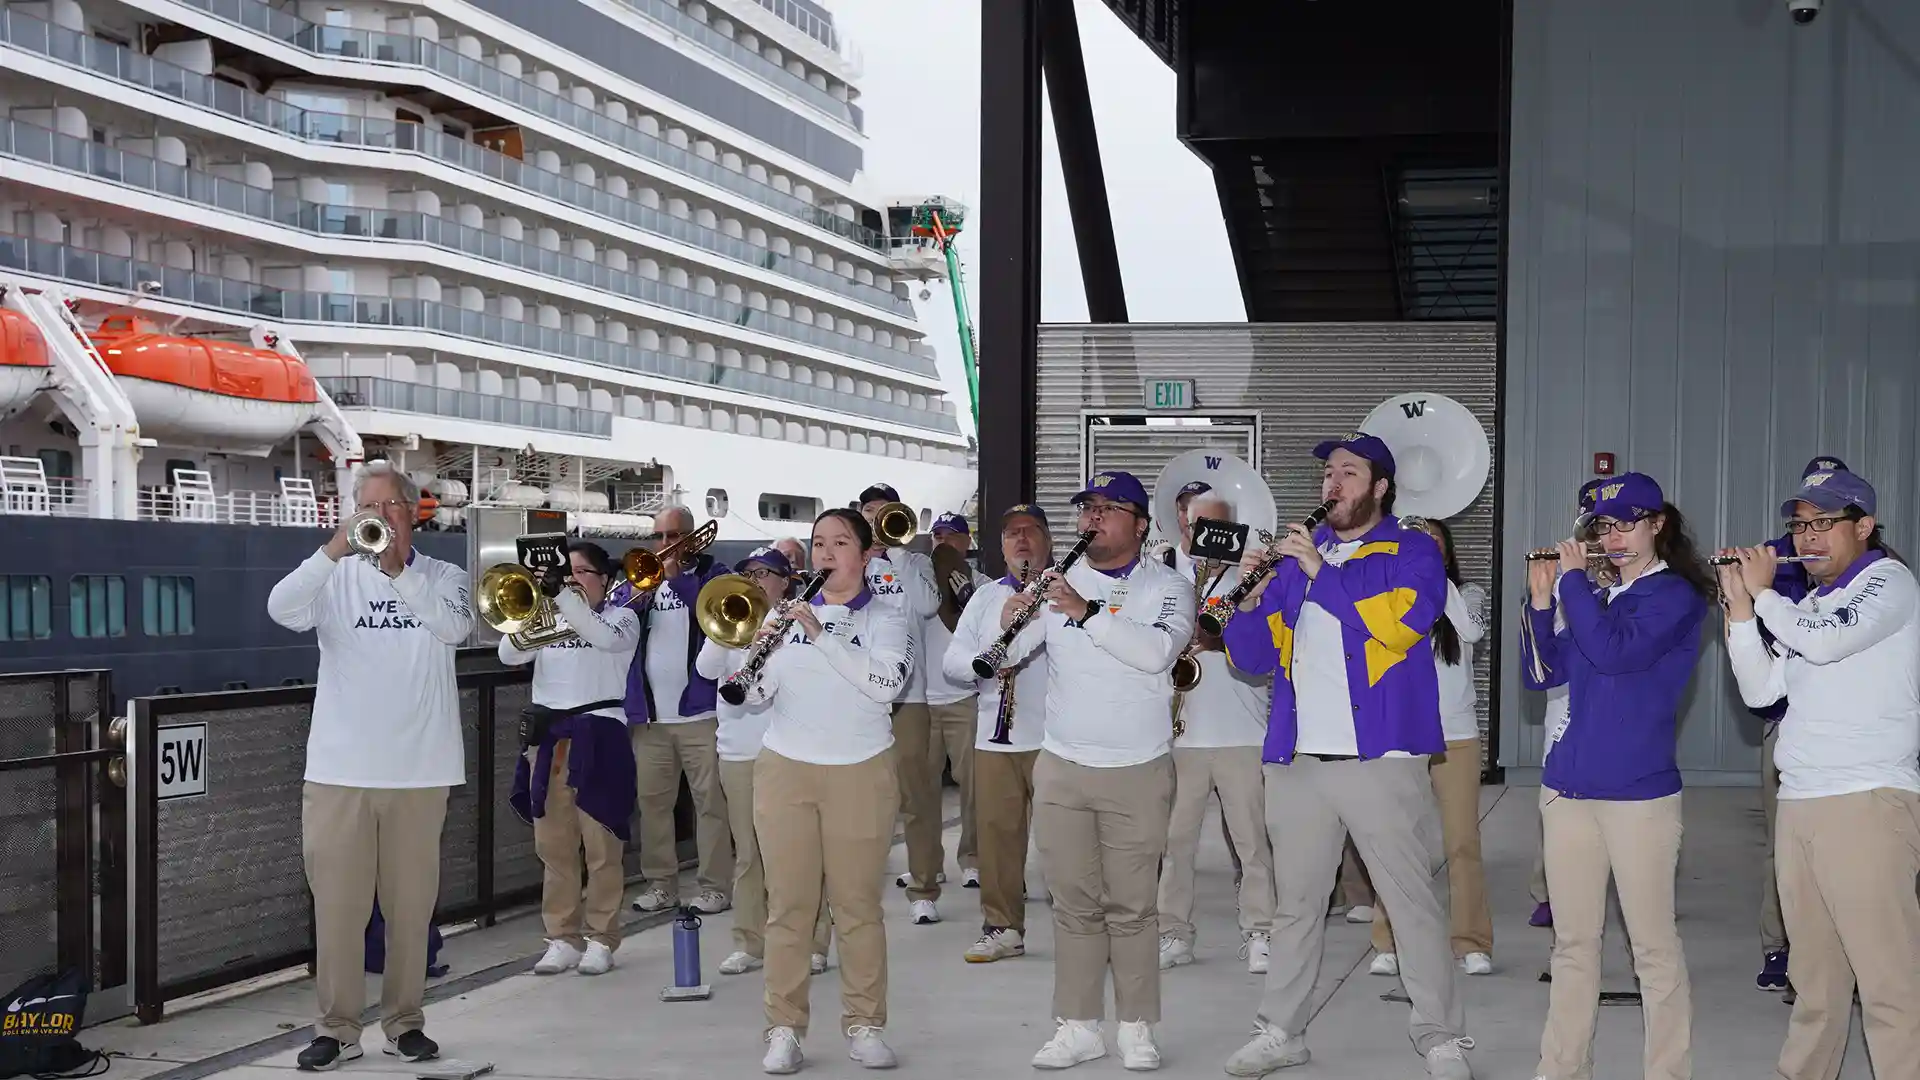 View of University of Washington Alumni Band performing at Holland America Line's Alaska Sailaway event in Seattle.